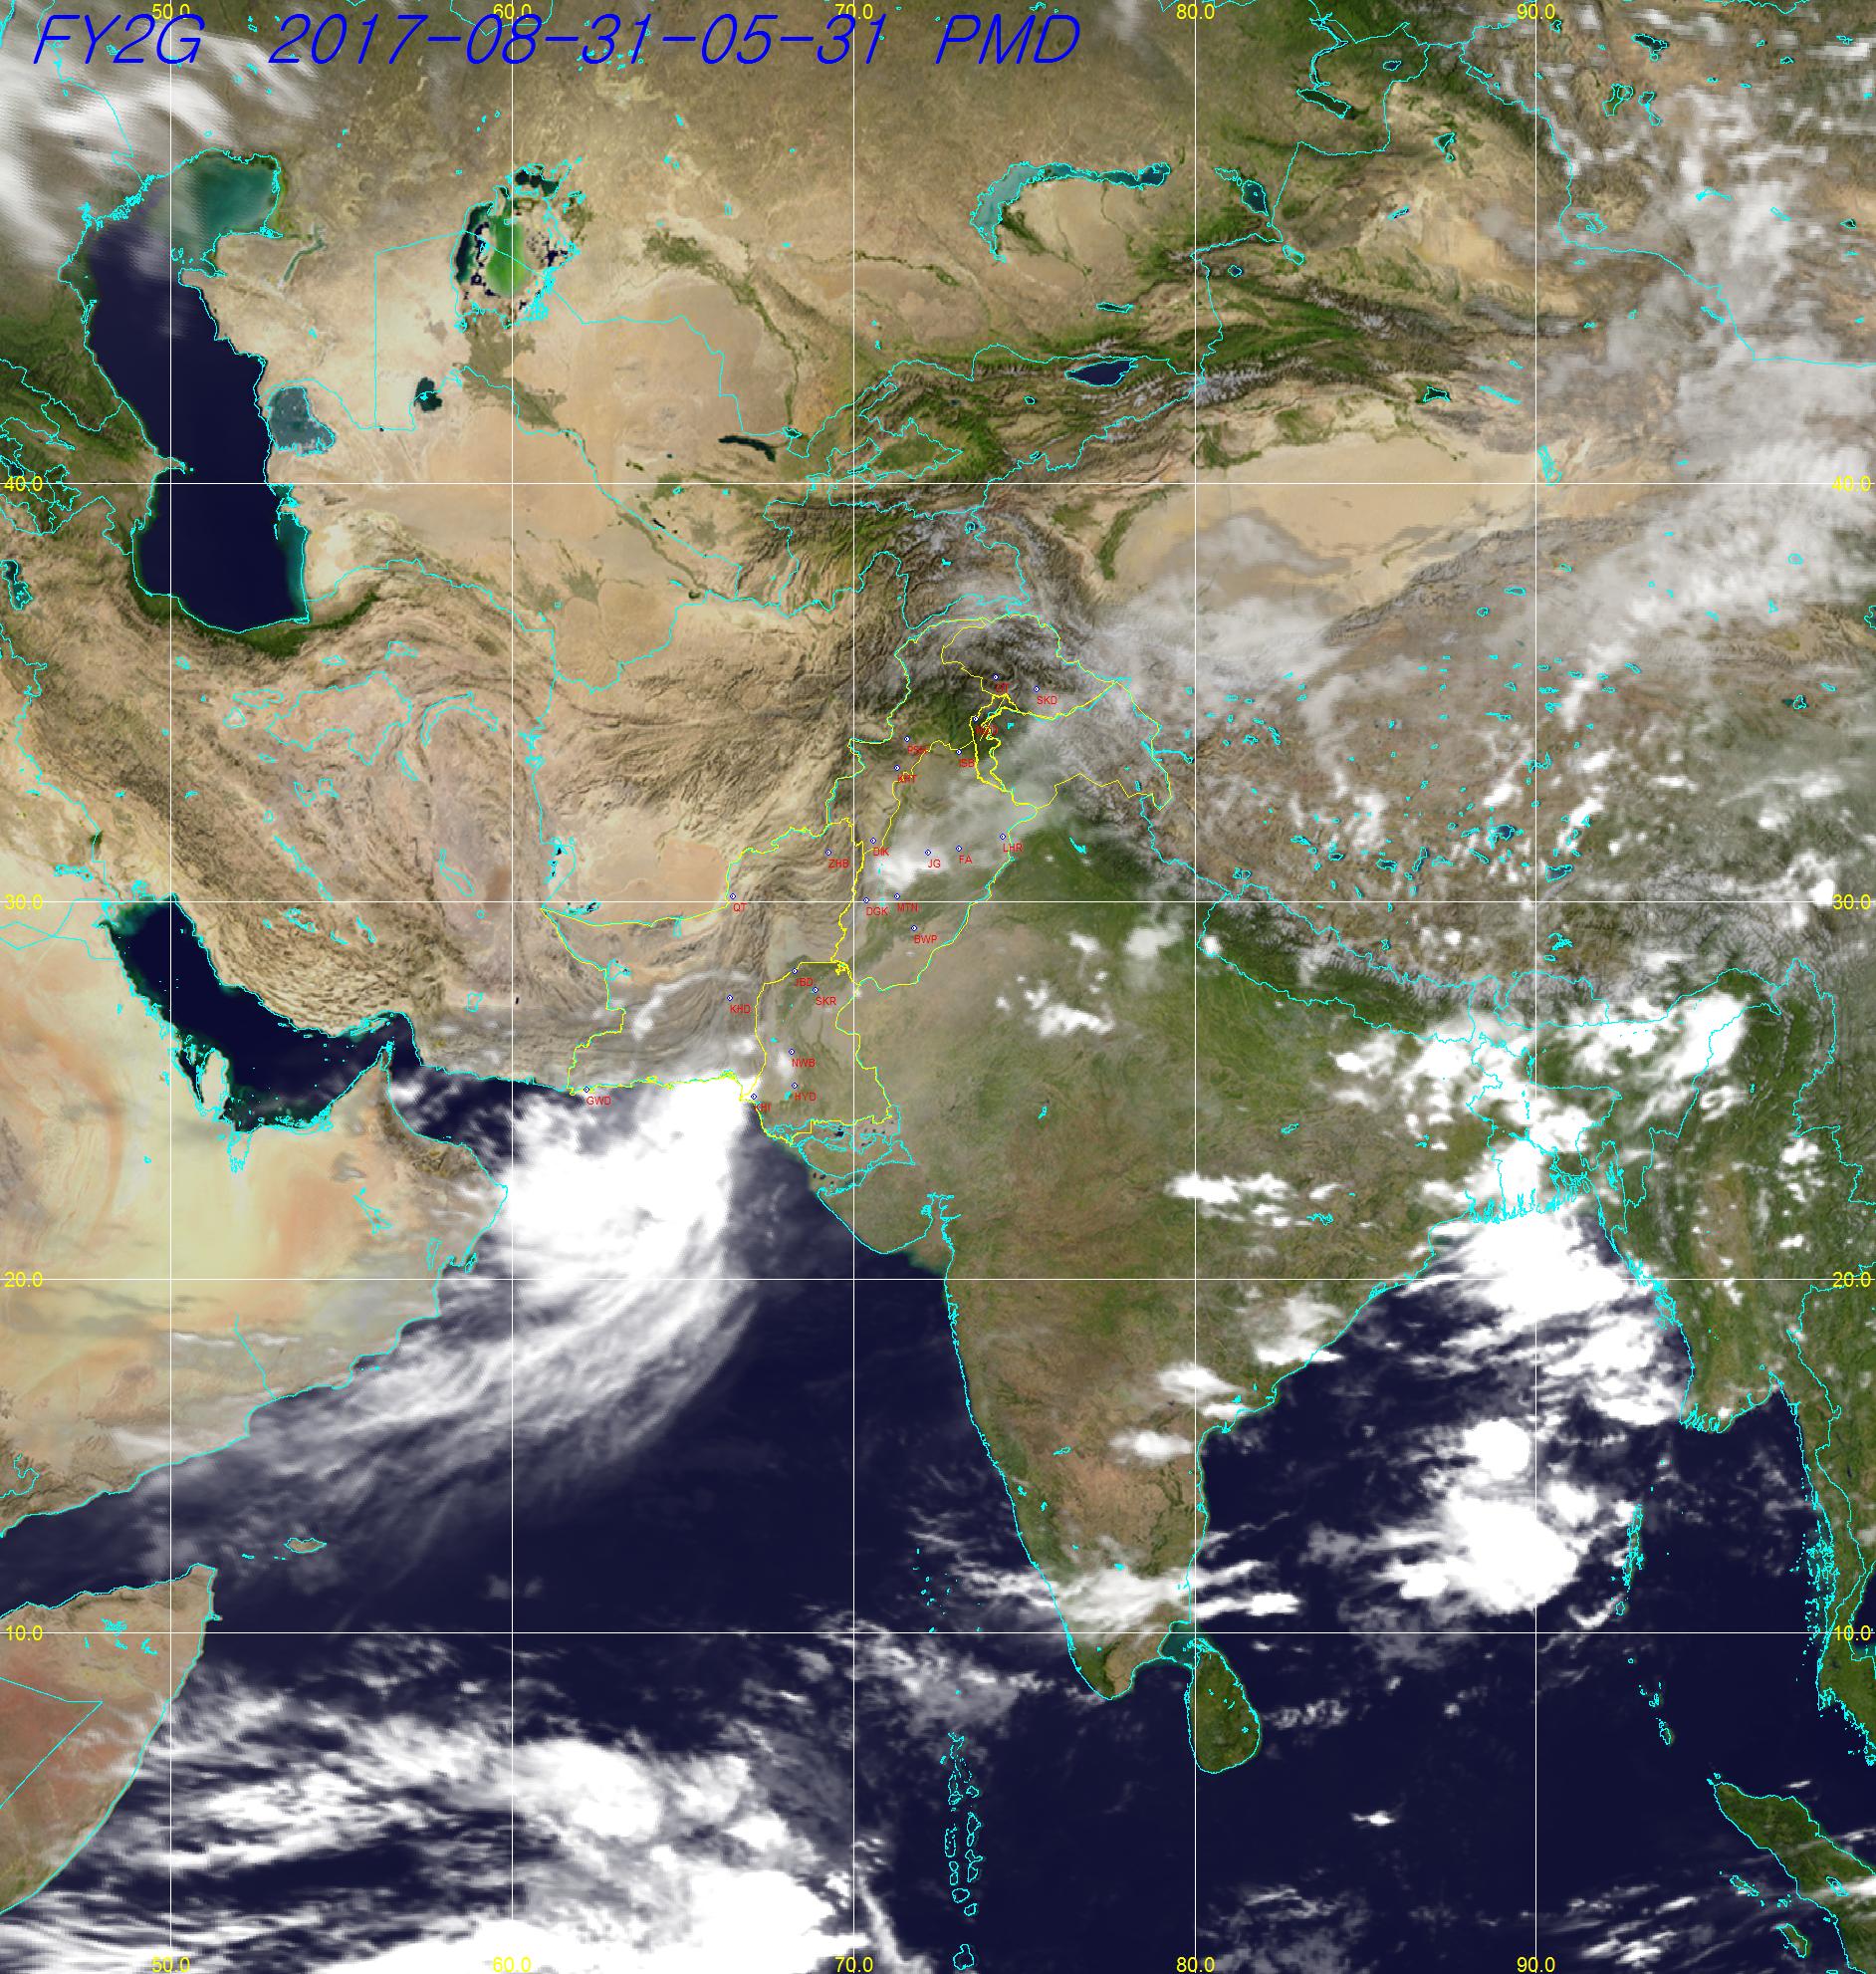 Latest satellite image from Pakistan Meteorological Department showing monsoon system over Karachi